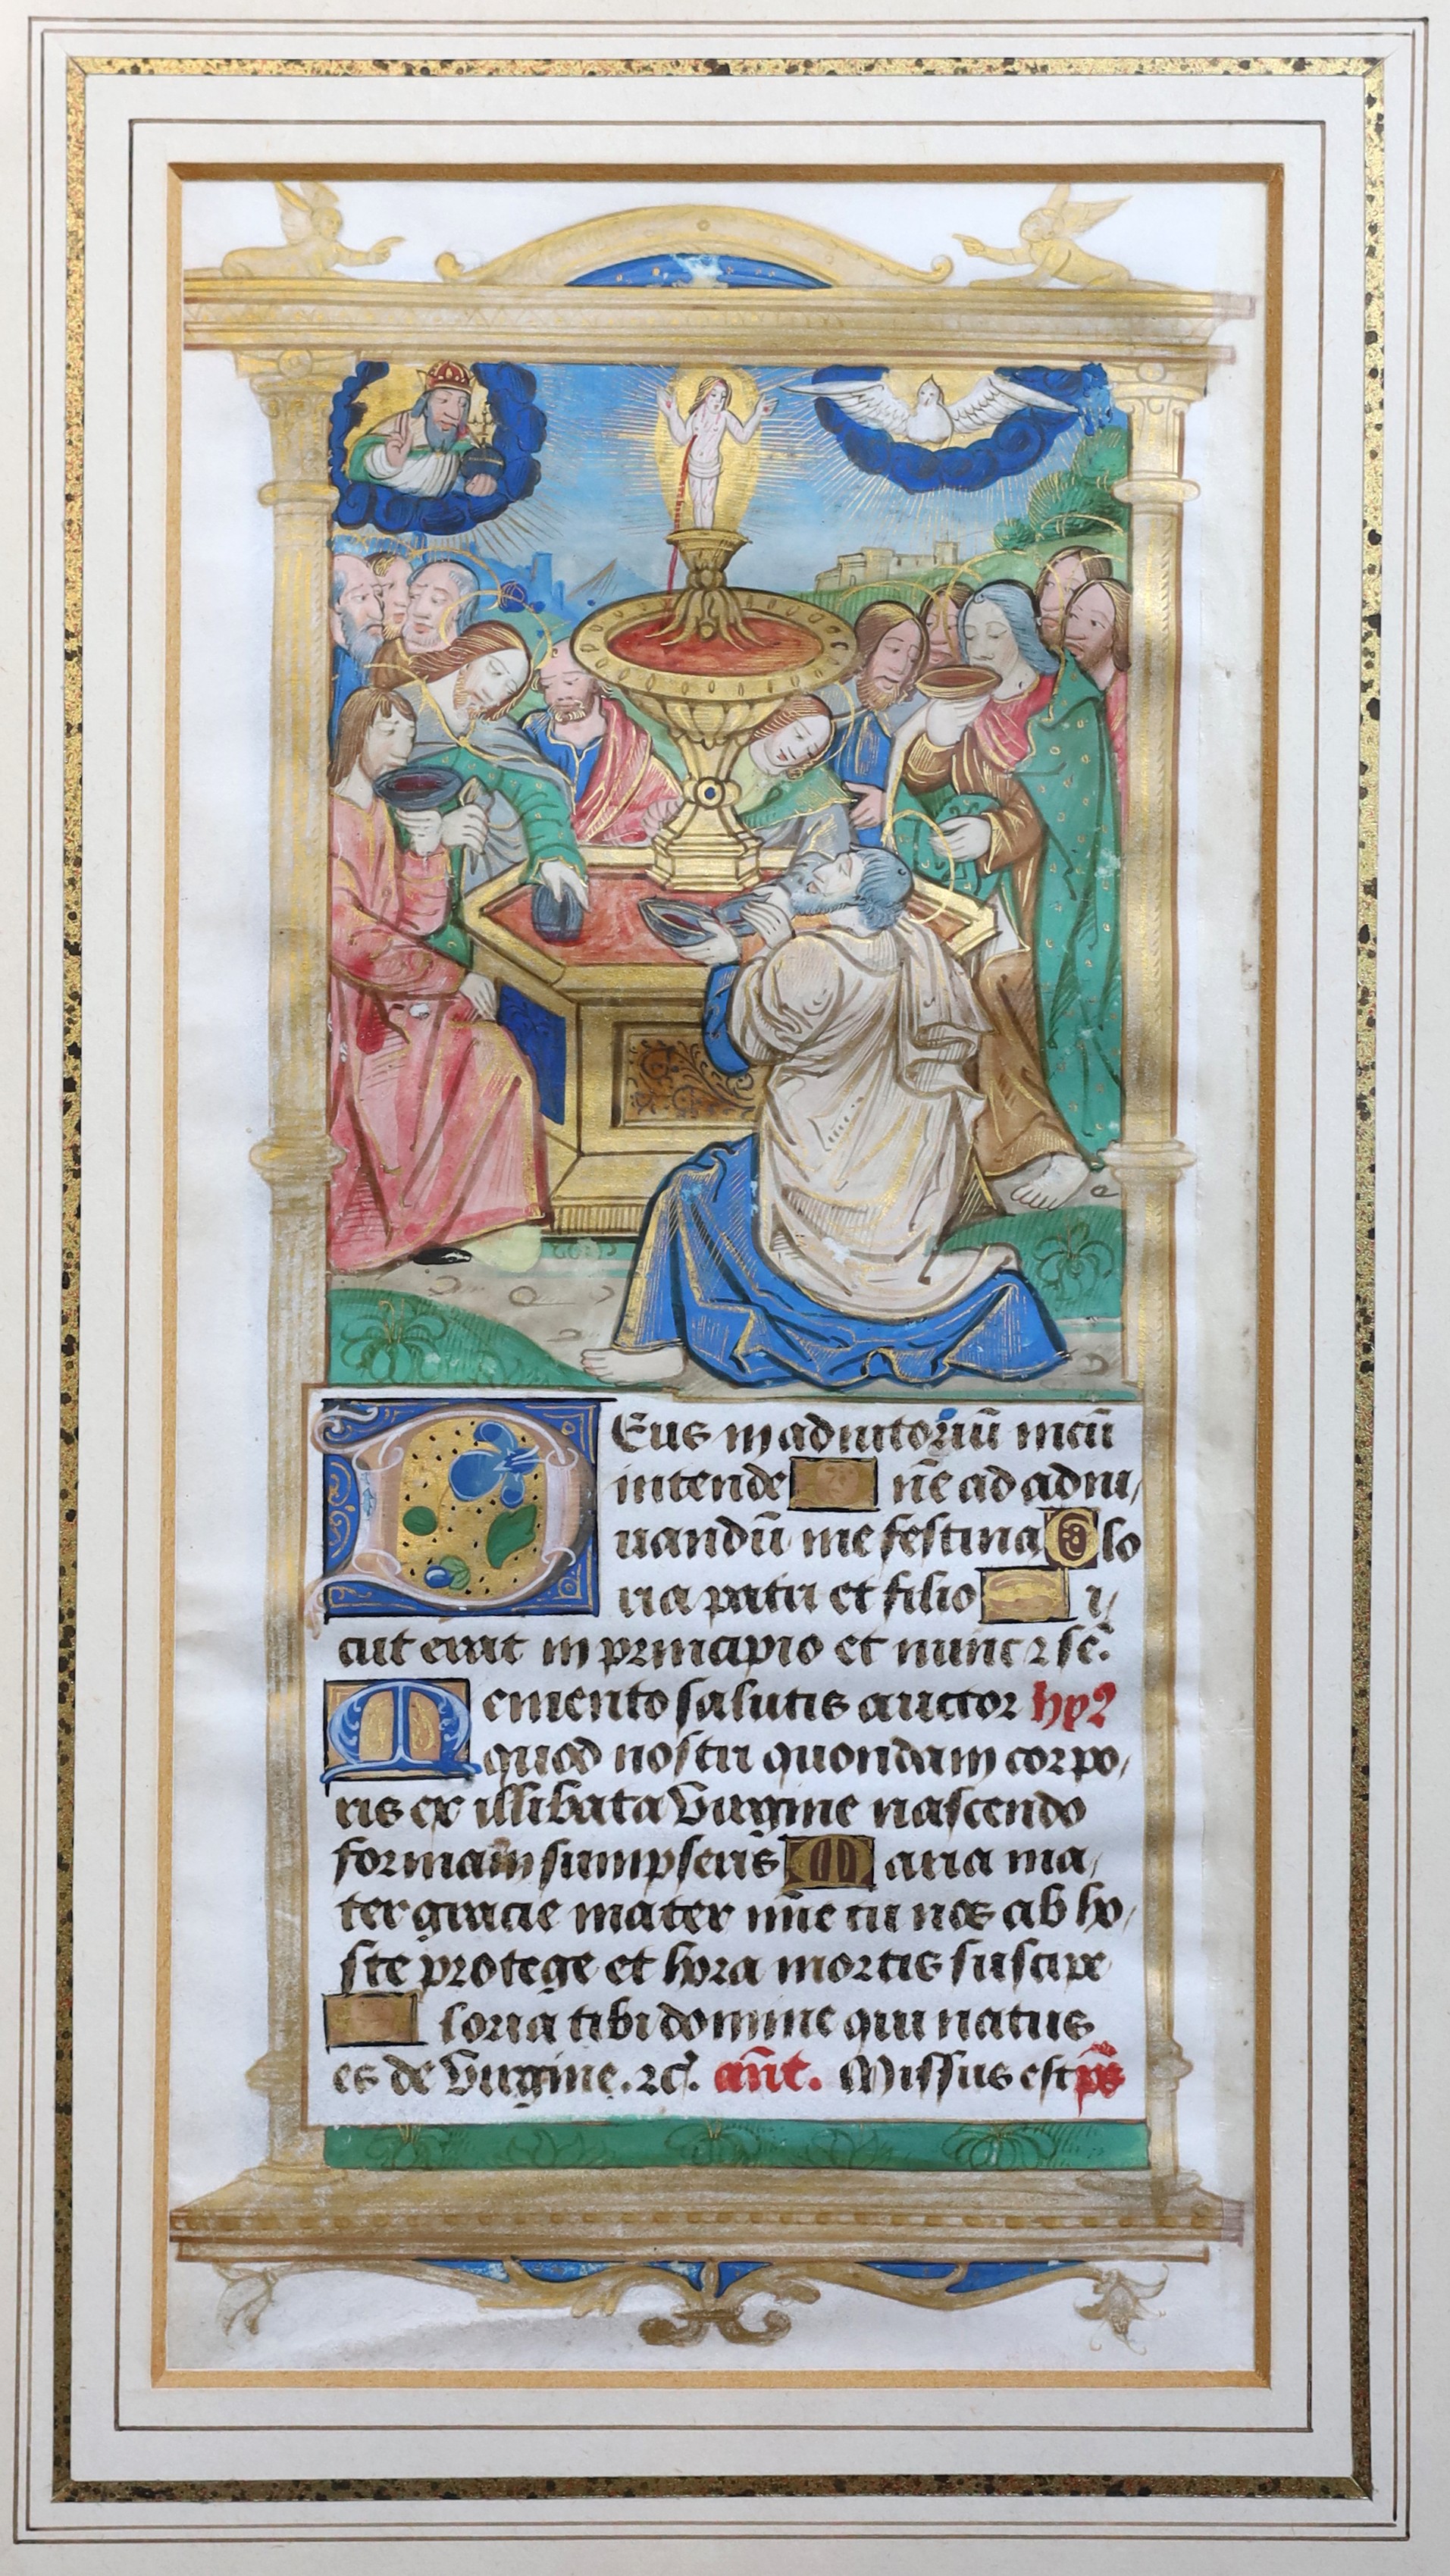 Early 16th century French School, 'The Apostles drinking from the Fountain of Life’, illuminated leaf watercolour and gold leaf on vellum, c.1500, 21 x 11cm.